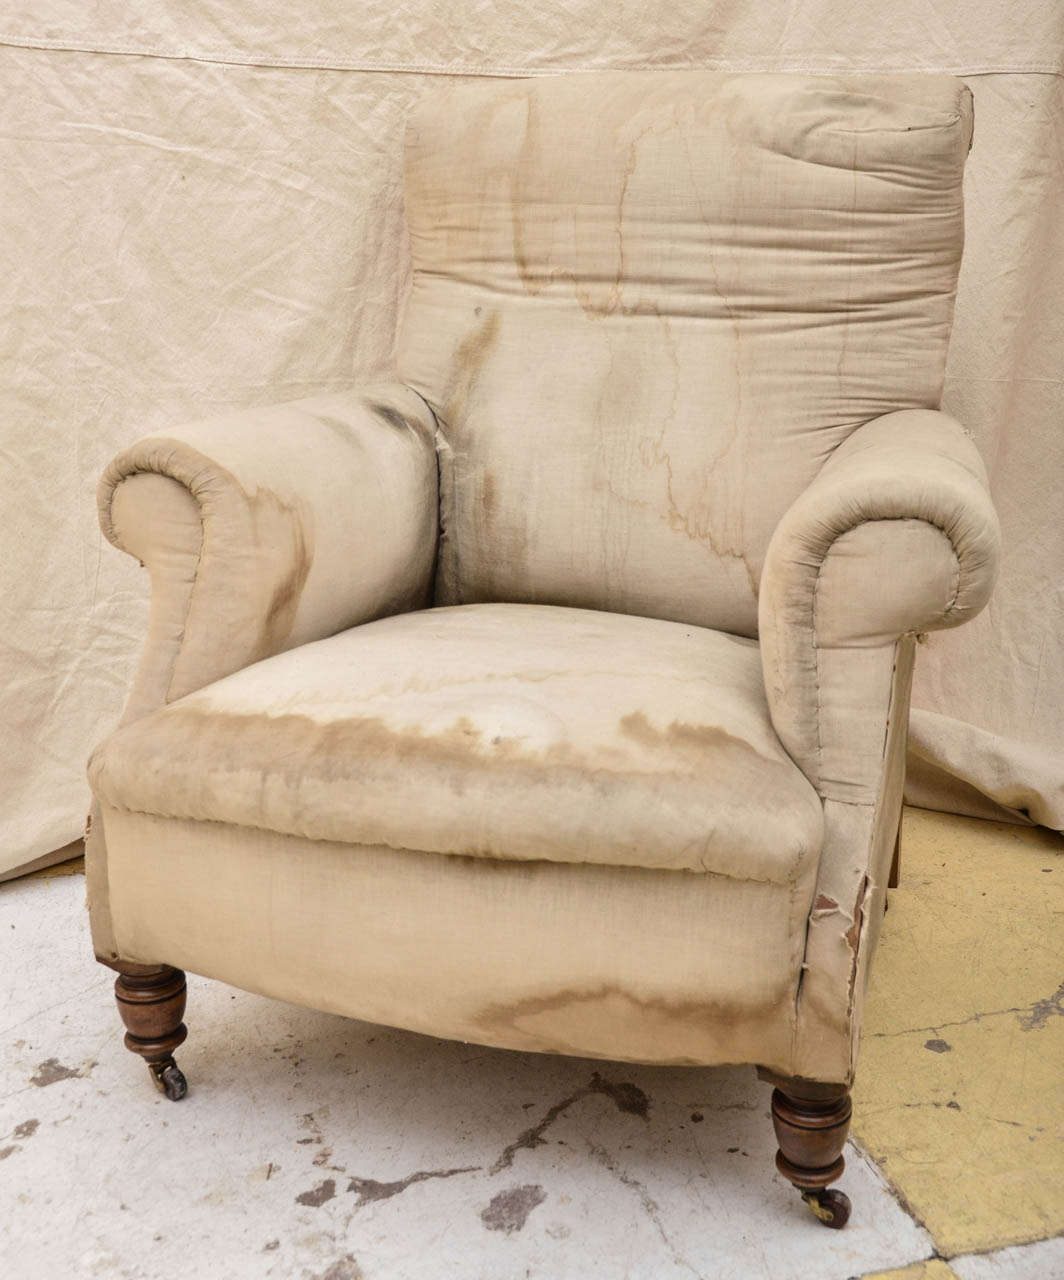 English Late 19th Cent. Howard Style Club Chair On Turned Circular Front Legs & Rear Tapered Rectangular Rear Legs With Brass Castors Having Brown Ceramic Wheels. The Upholstered Seat Has A Rounded Front Edge. The Arms Have A Out Swept Curve As Does